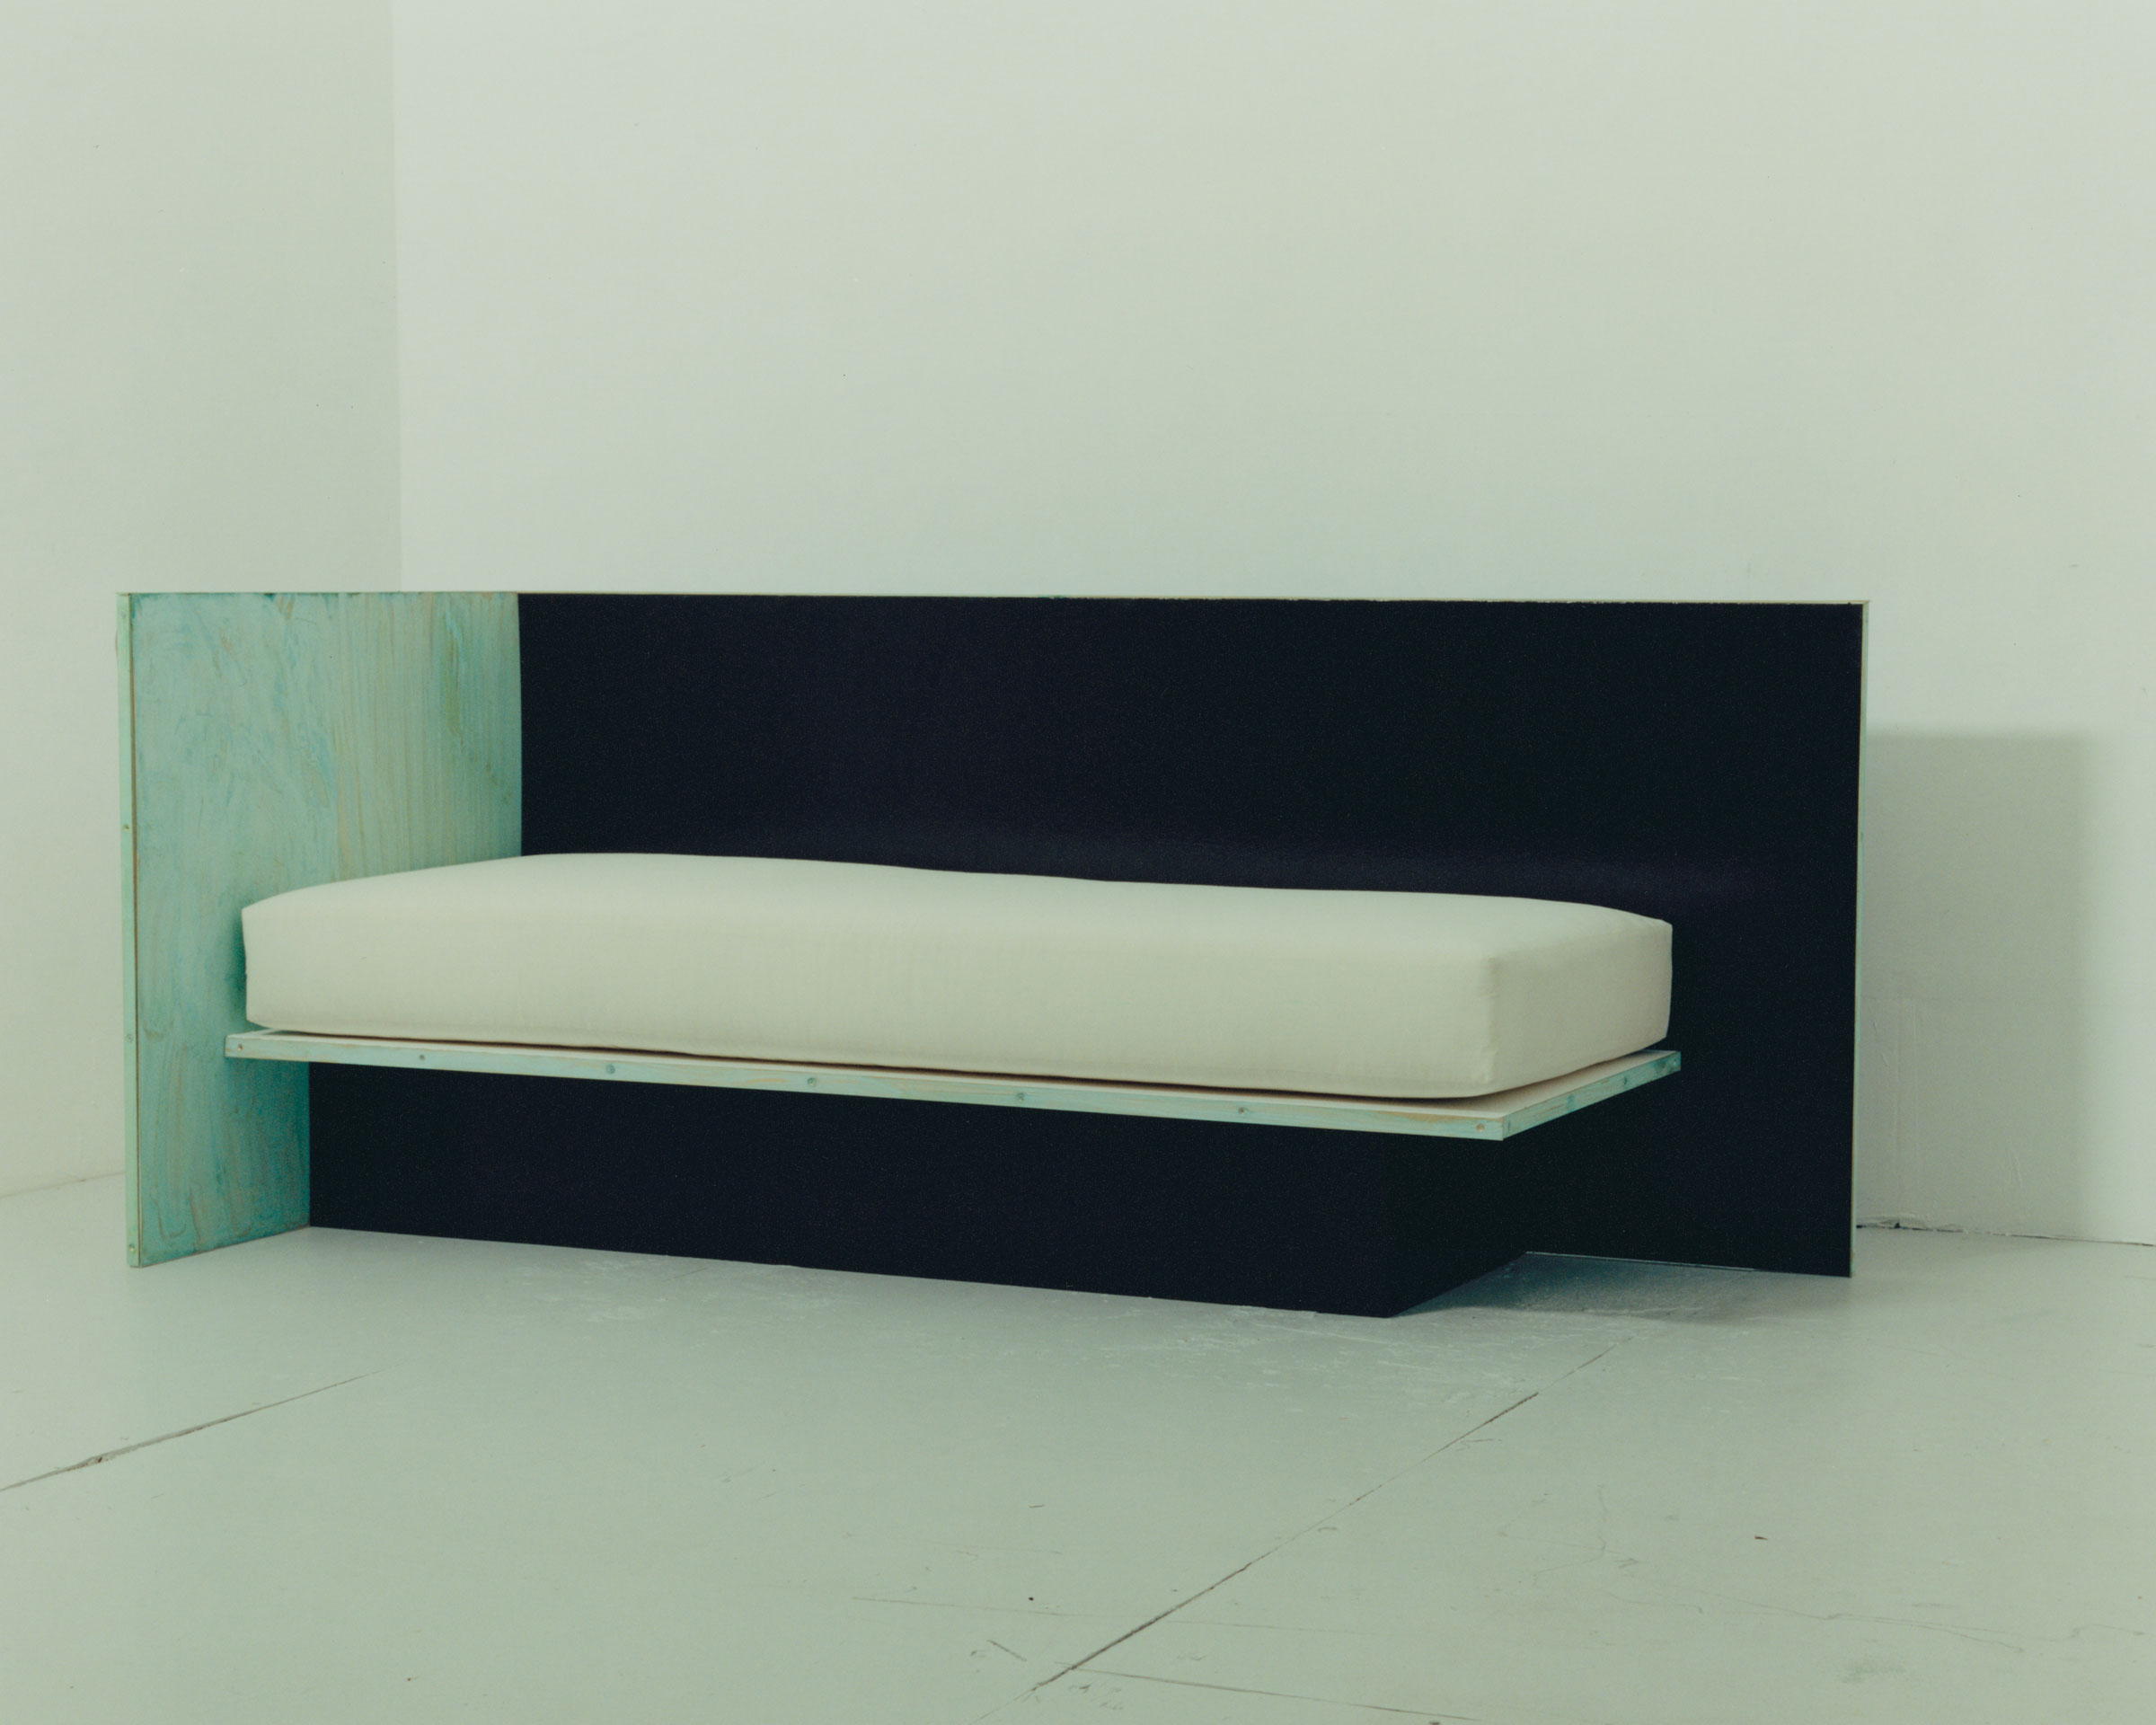 Brass & lacquered wood daybed, 2018. Plywood, lacquer, patinated brass and upholstered mattress.